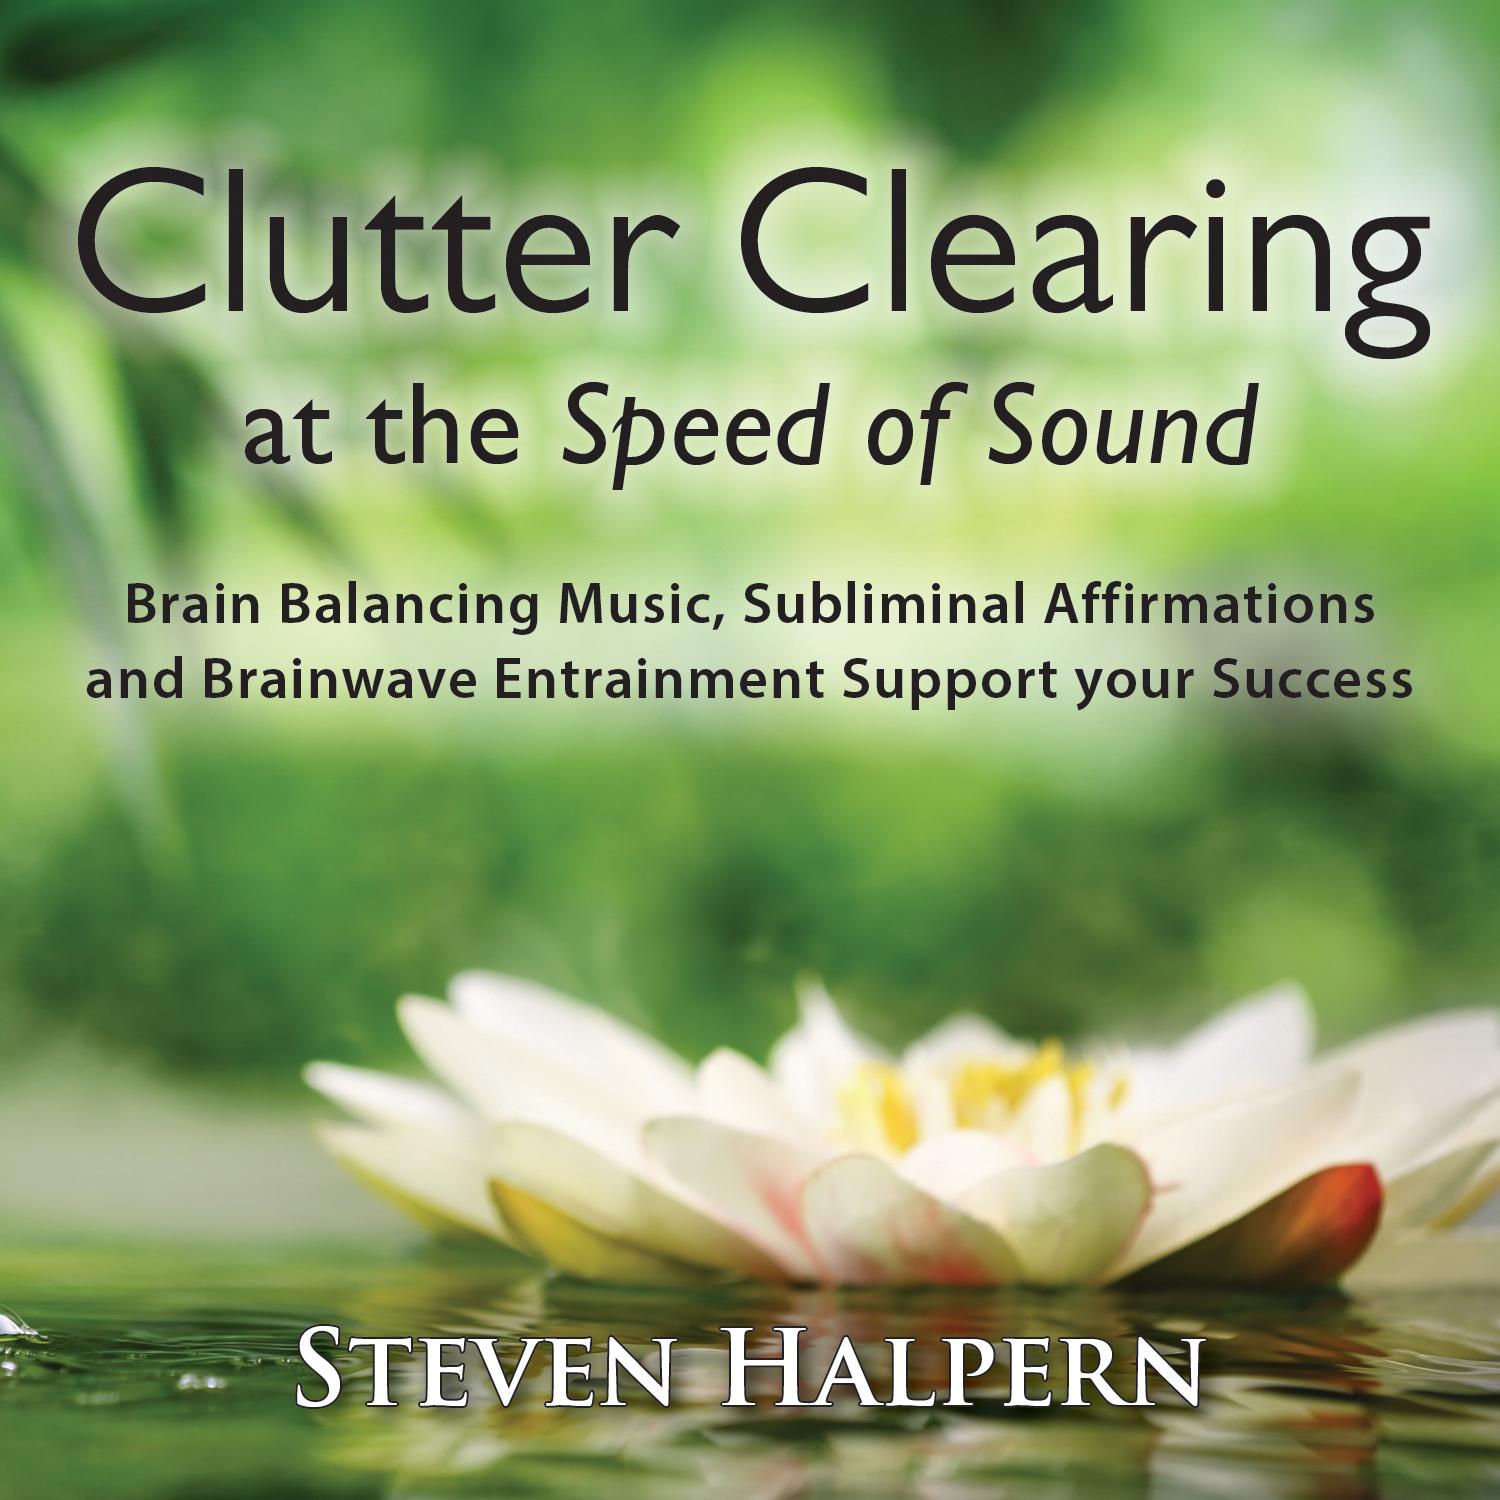 Clutter Clearing at the Speed of Sound